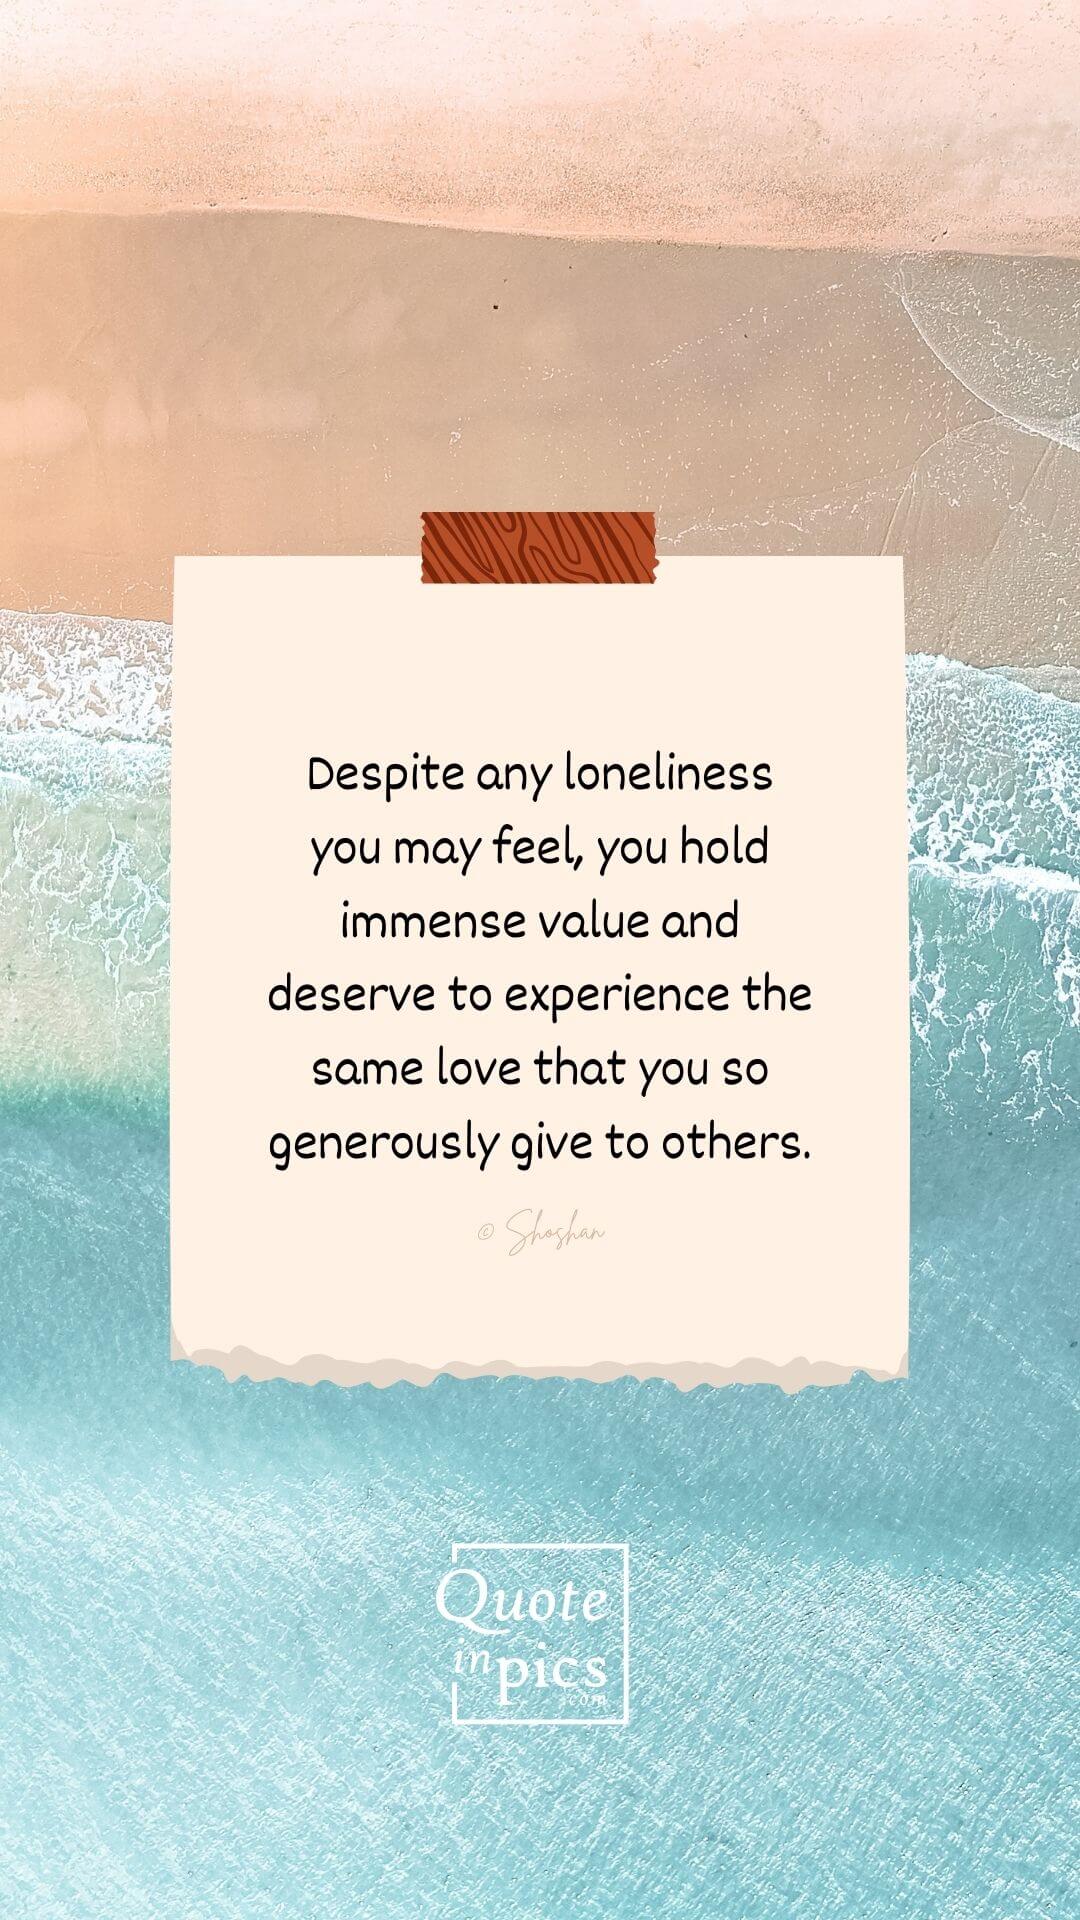 Despite any loneliness you may feel, you hold immense value...